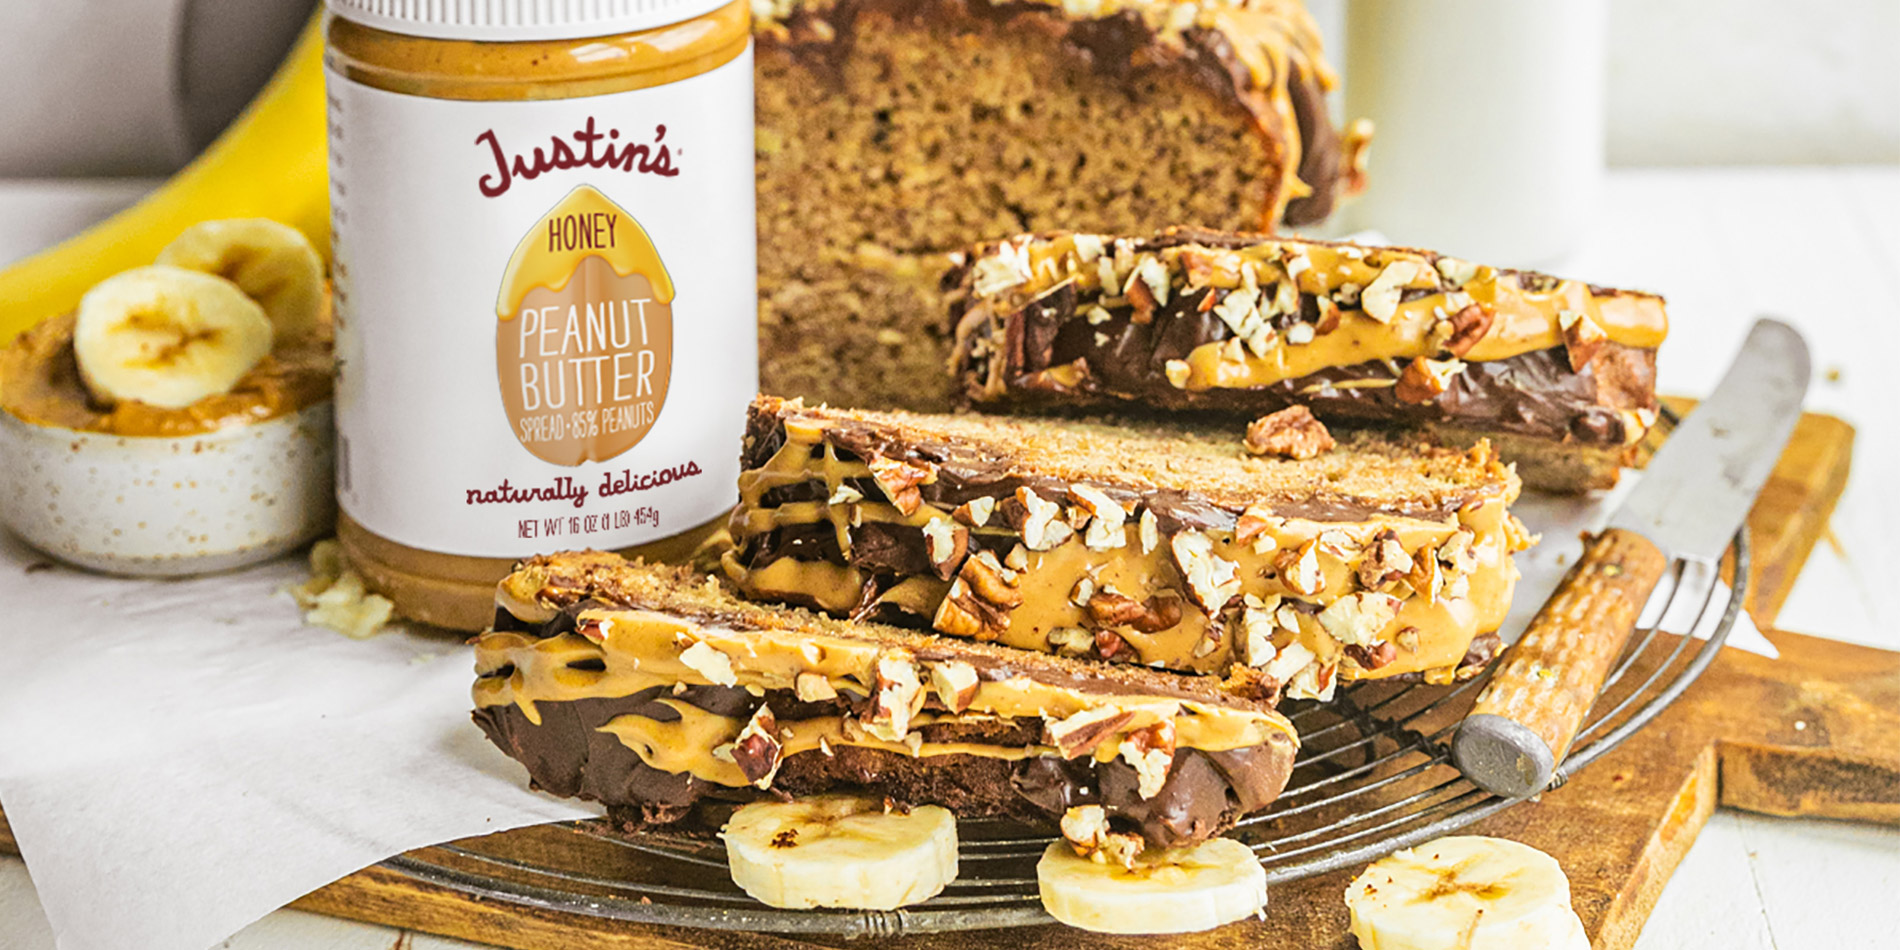 HONEY PEANUT BUTTER BANANA BREAD WITH CHOCOLATE PEANUT BUTTER DRIZZLE